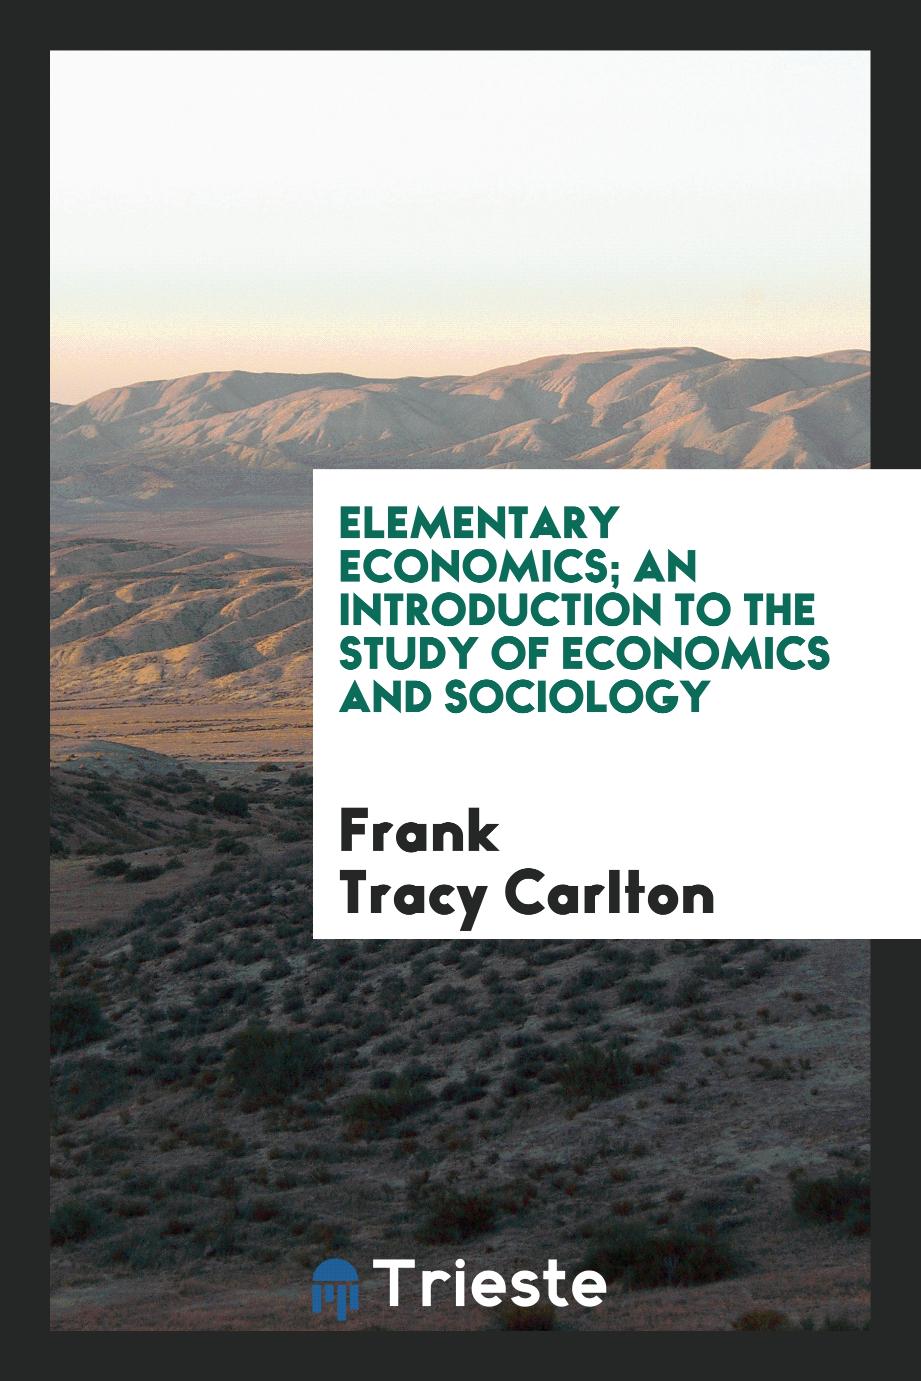 Elementary economics; an introduction to the study of economics and sociology